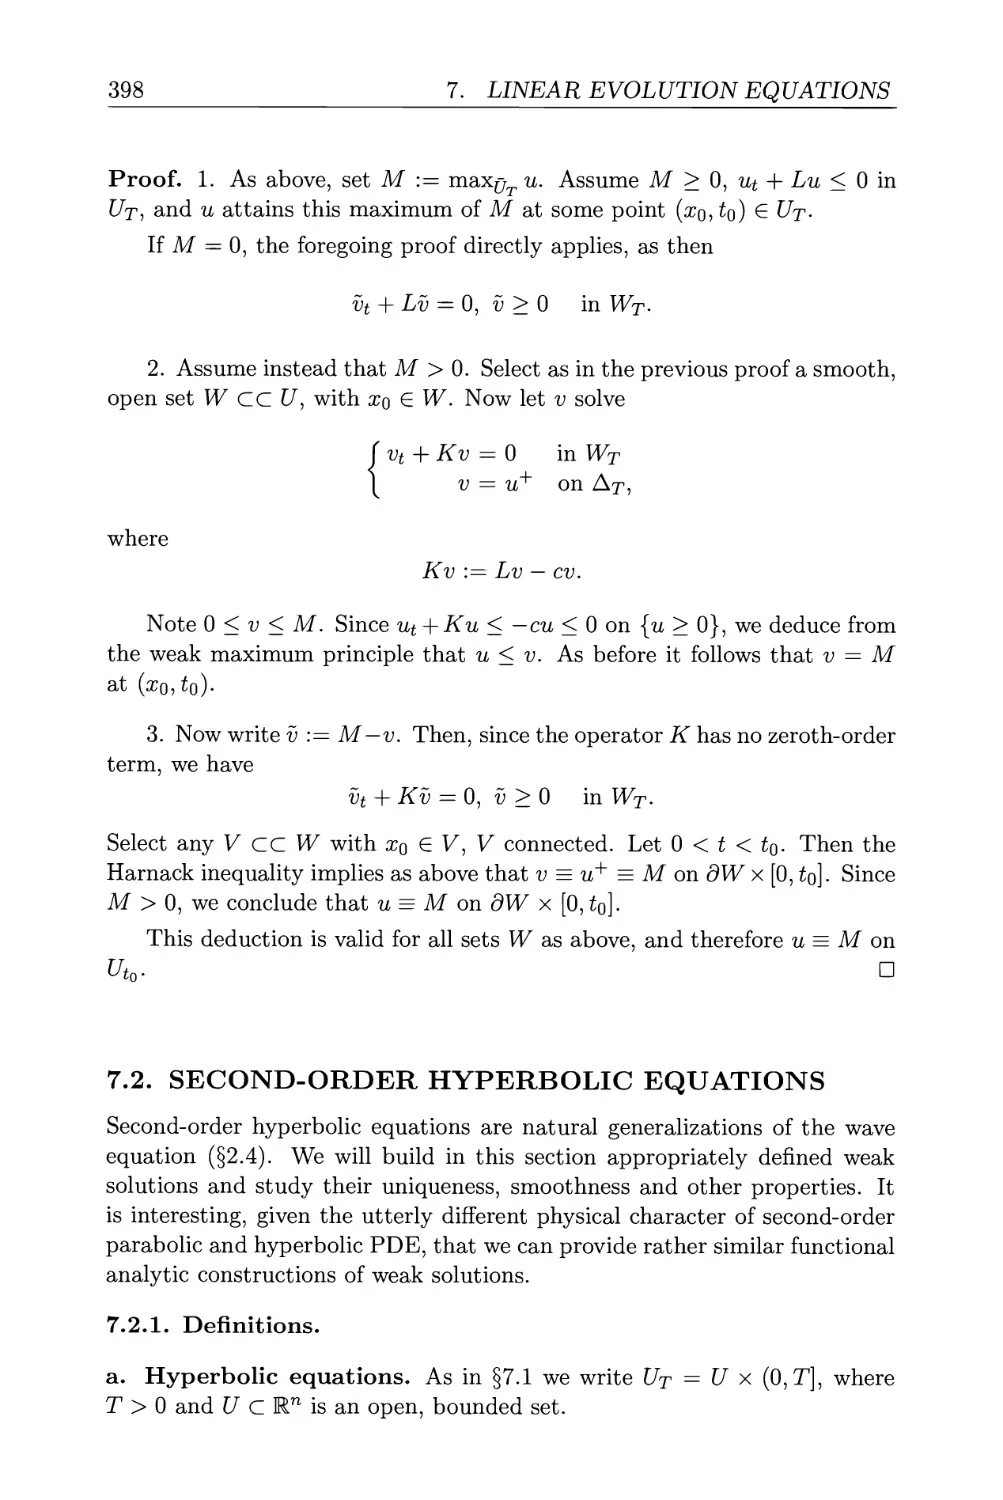 7.2. Second-order hyperbolic equations